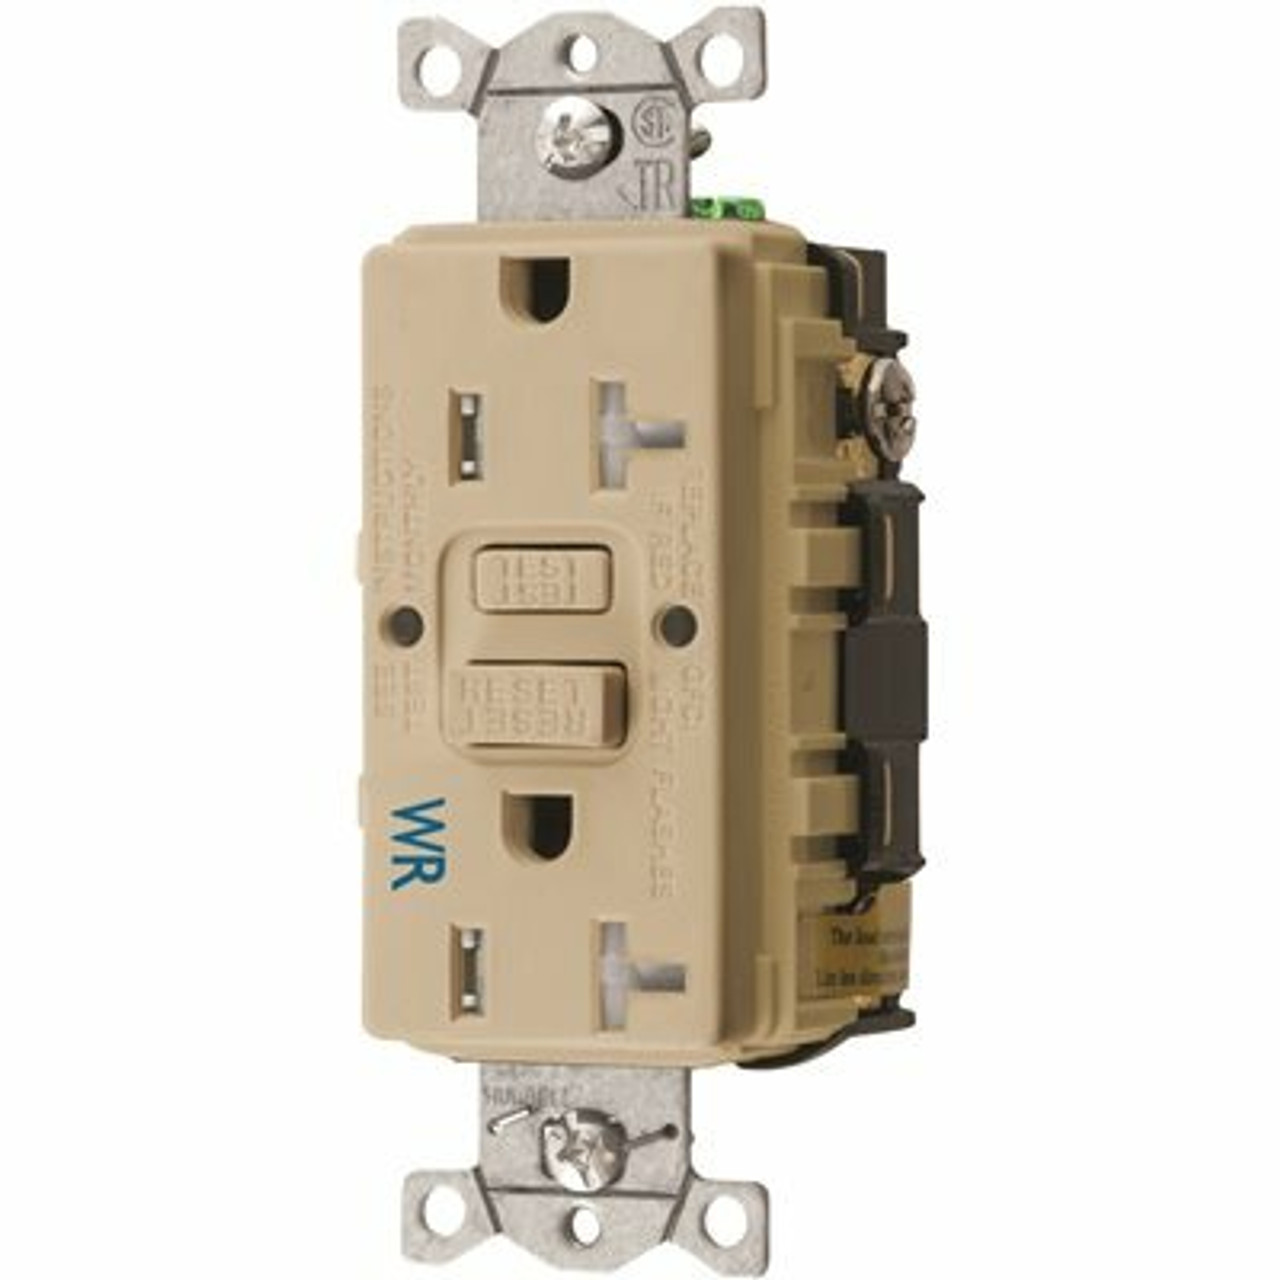 Hubbell Wiring 20-Amp 125-Volt Tamper-Resistant And Weather Resistant Gfci Duplex Outlet Nema 5-20R Autoguard, Ivory